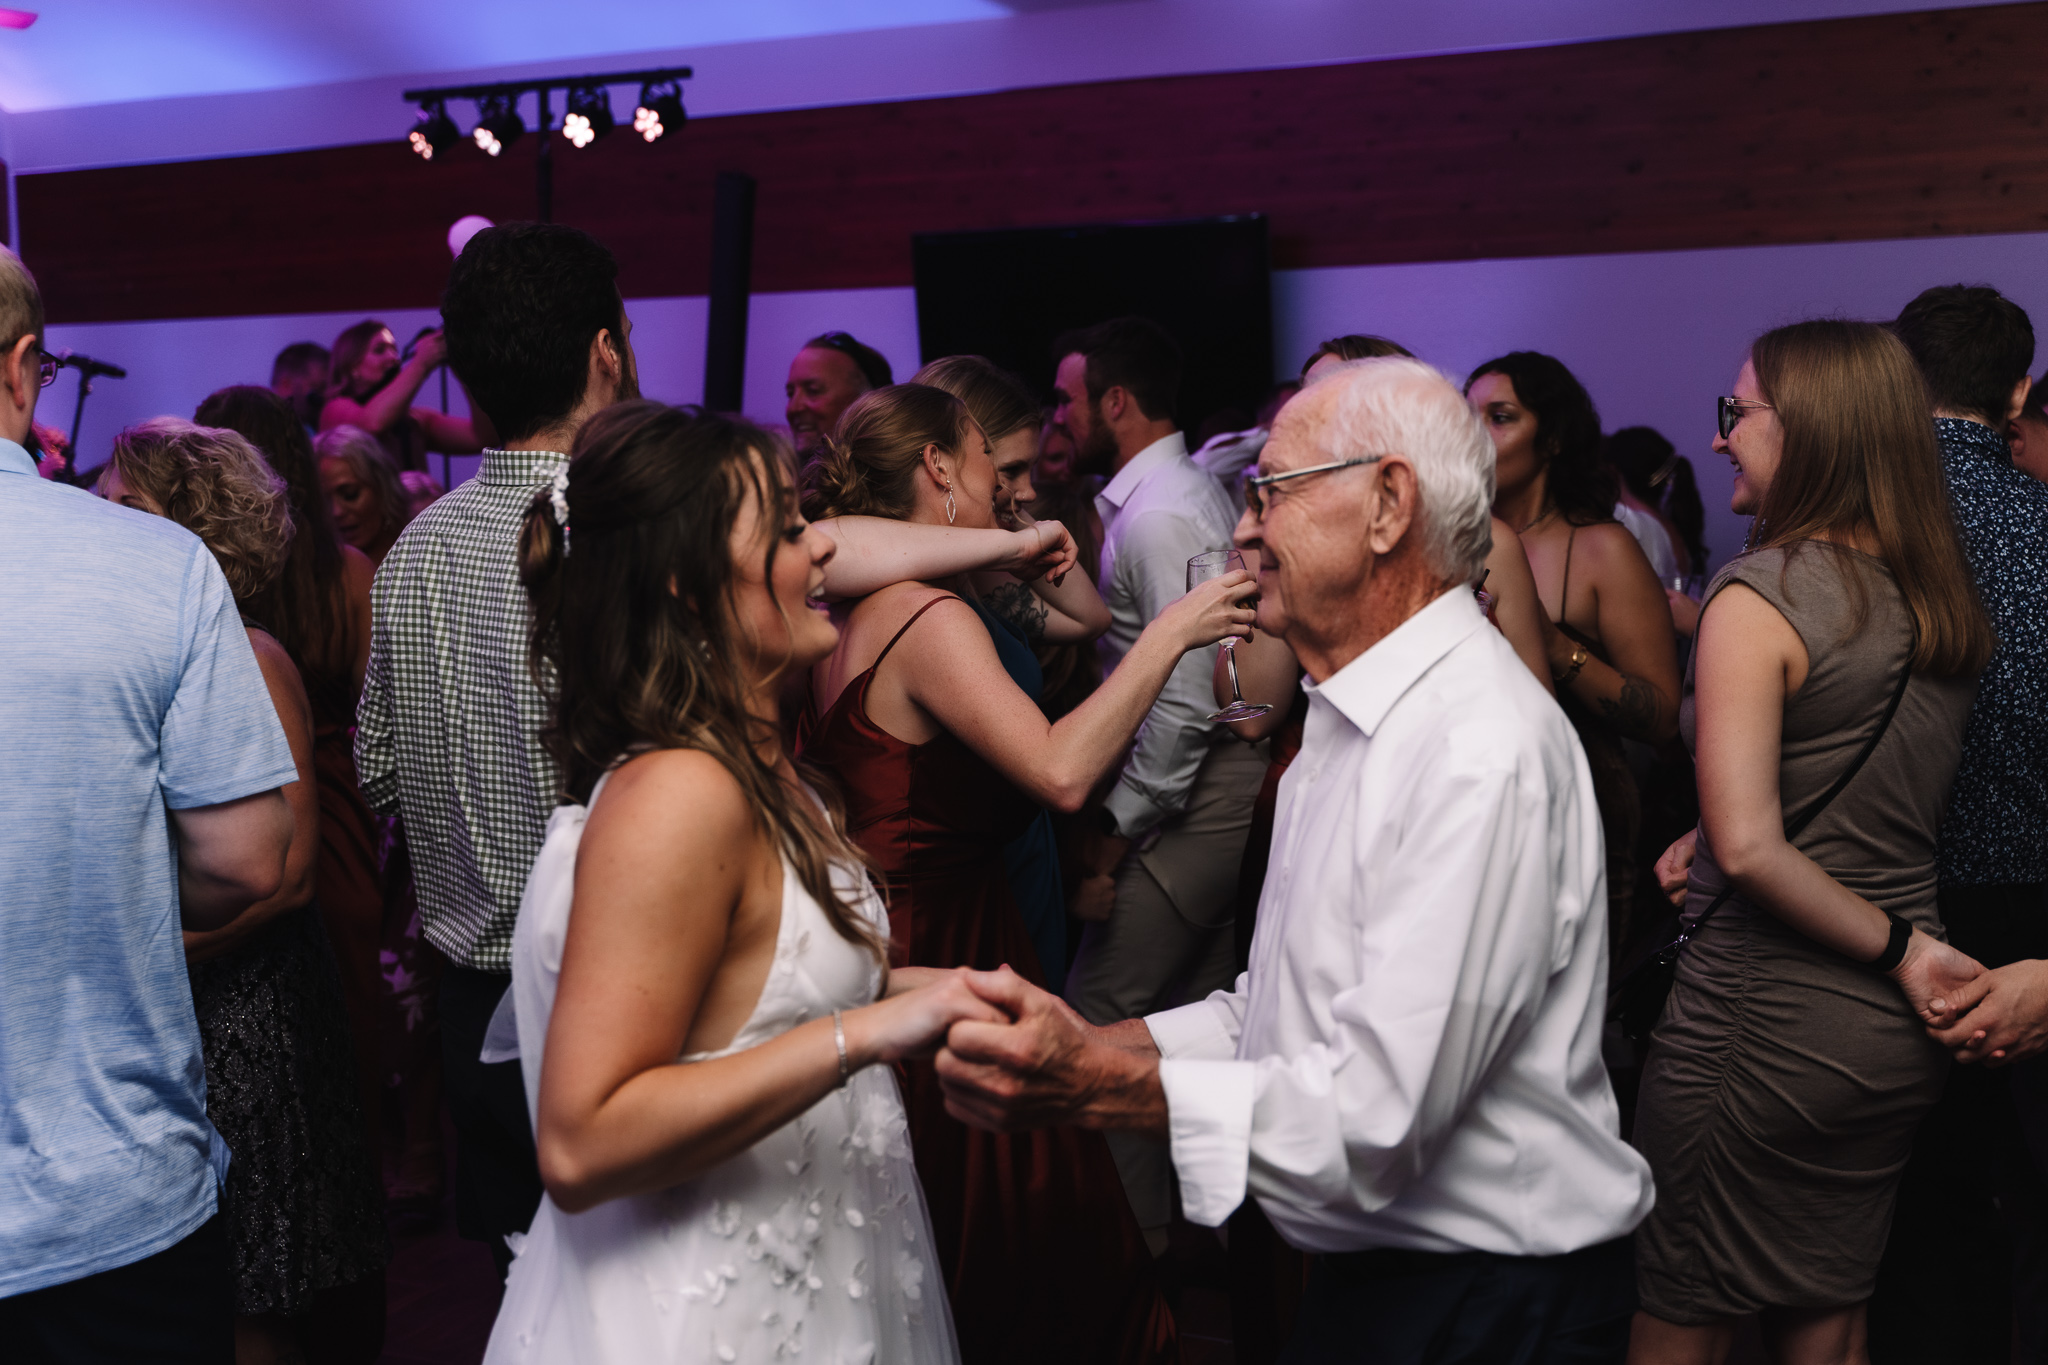 Bride dancing with her grandpa dancing energetically with each other on a dance floor at a lively evening event, with other guests and a live band in the background at a wedding in Minnesota